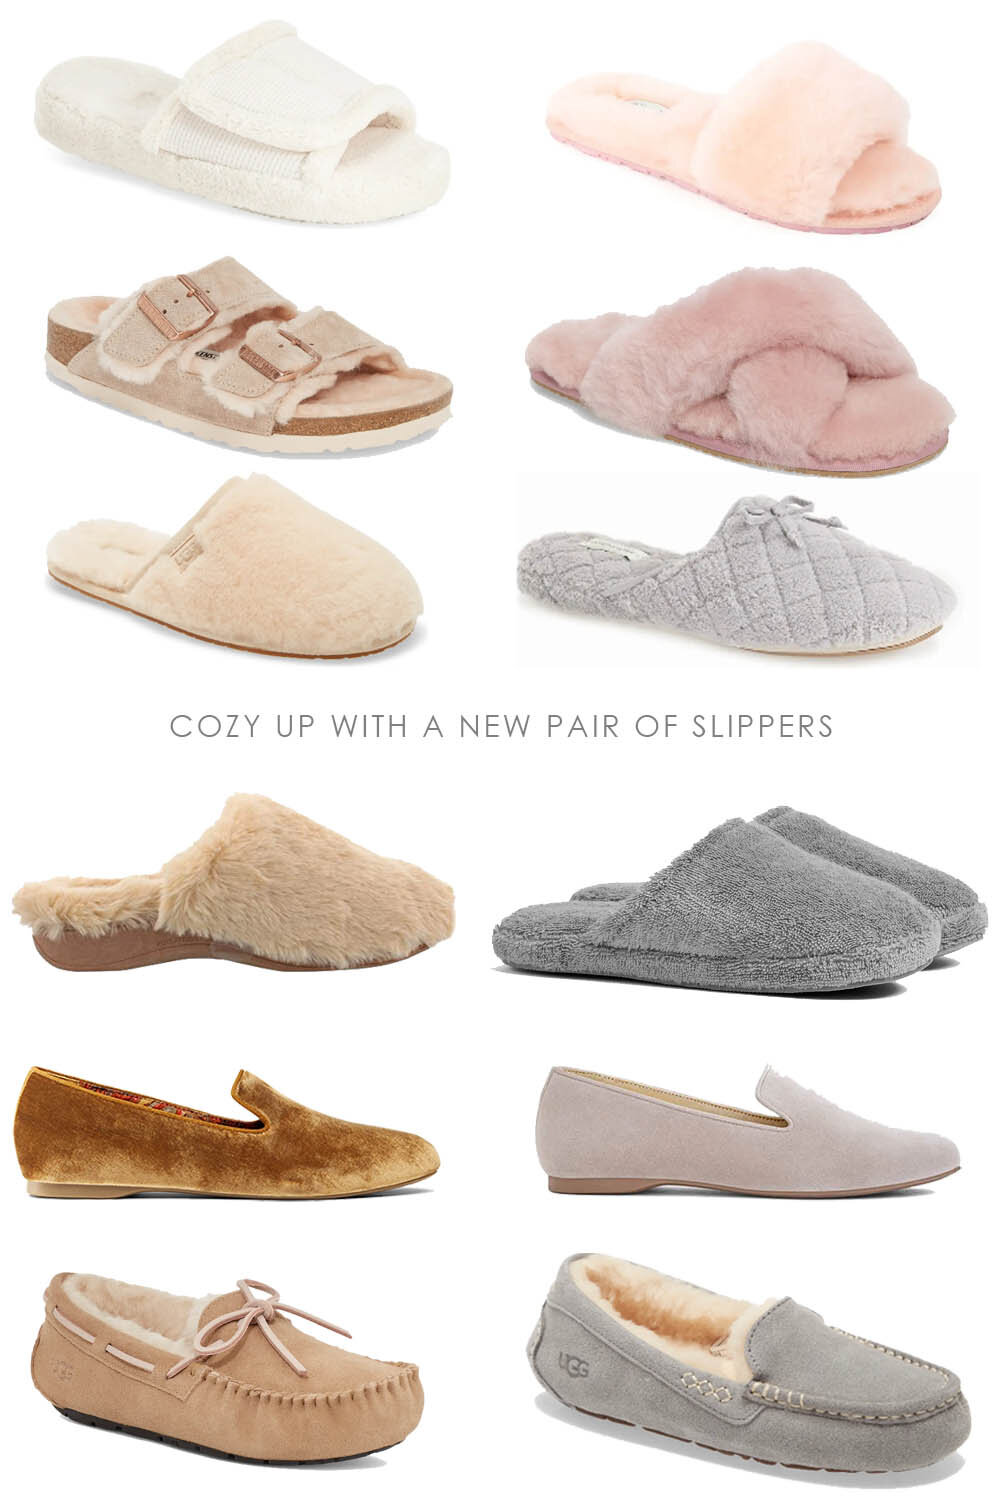 Don't go another Winter with a worn out pair of slippers. Cozy up with one of these 12 pairs of slippers. Your feet will thank you!